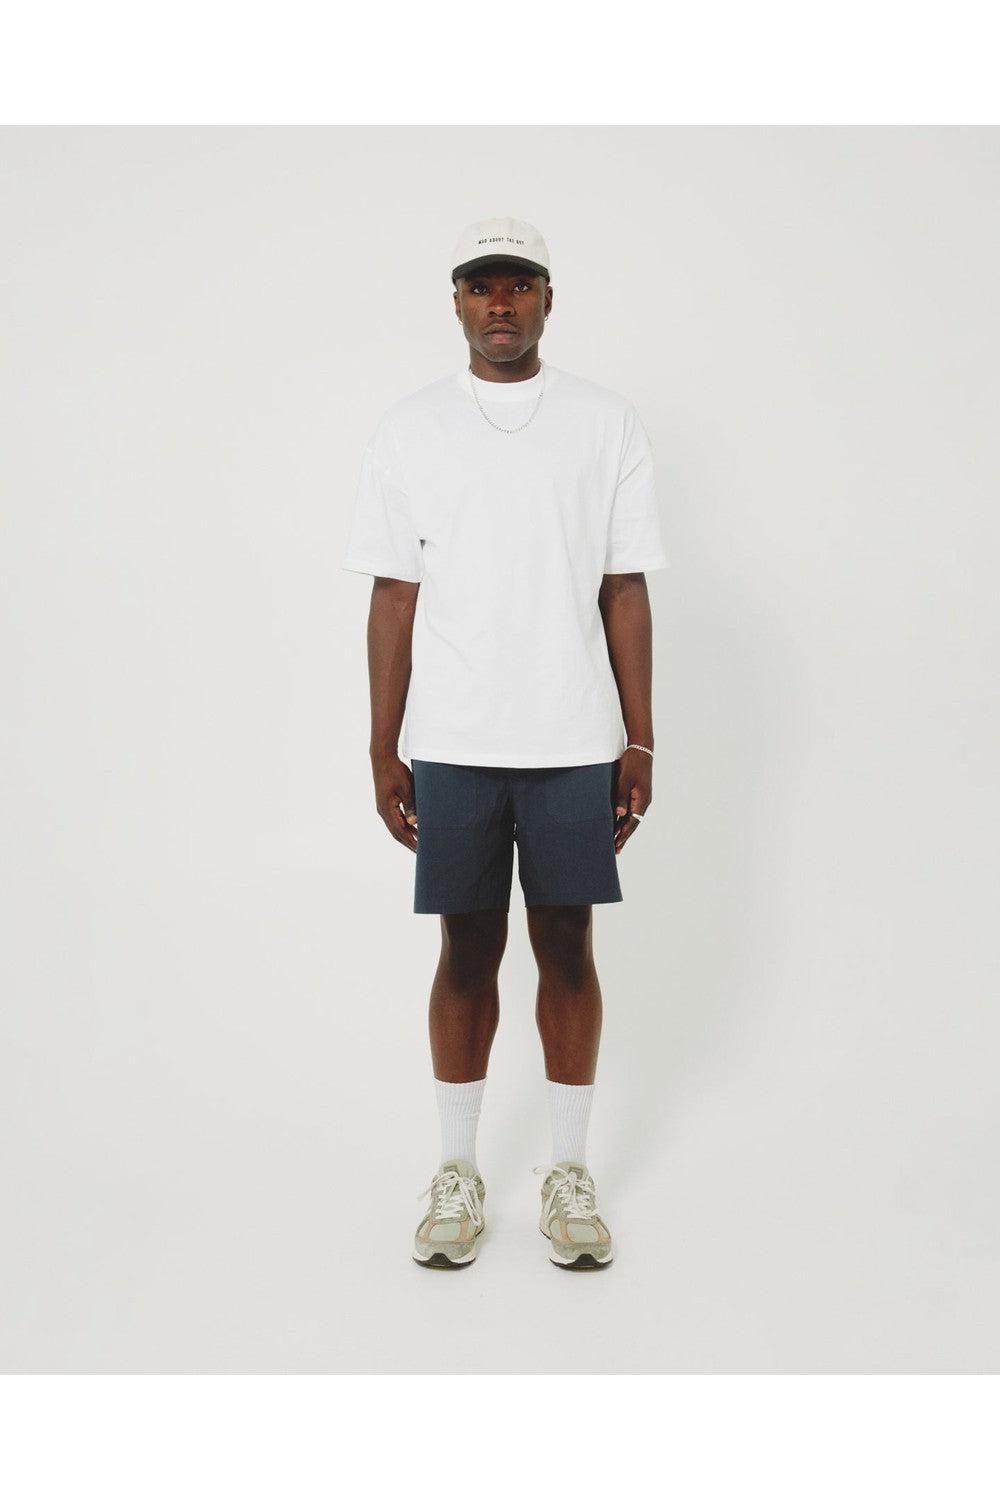 Commoners Utility Short - Navy | COMMONERS | Mad About The Boy